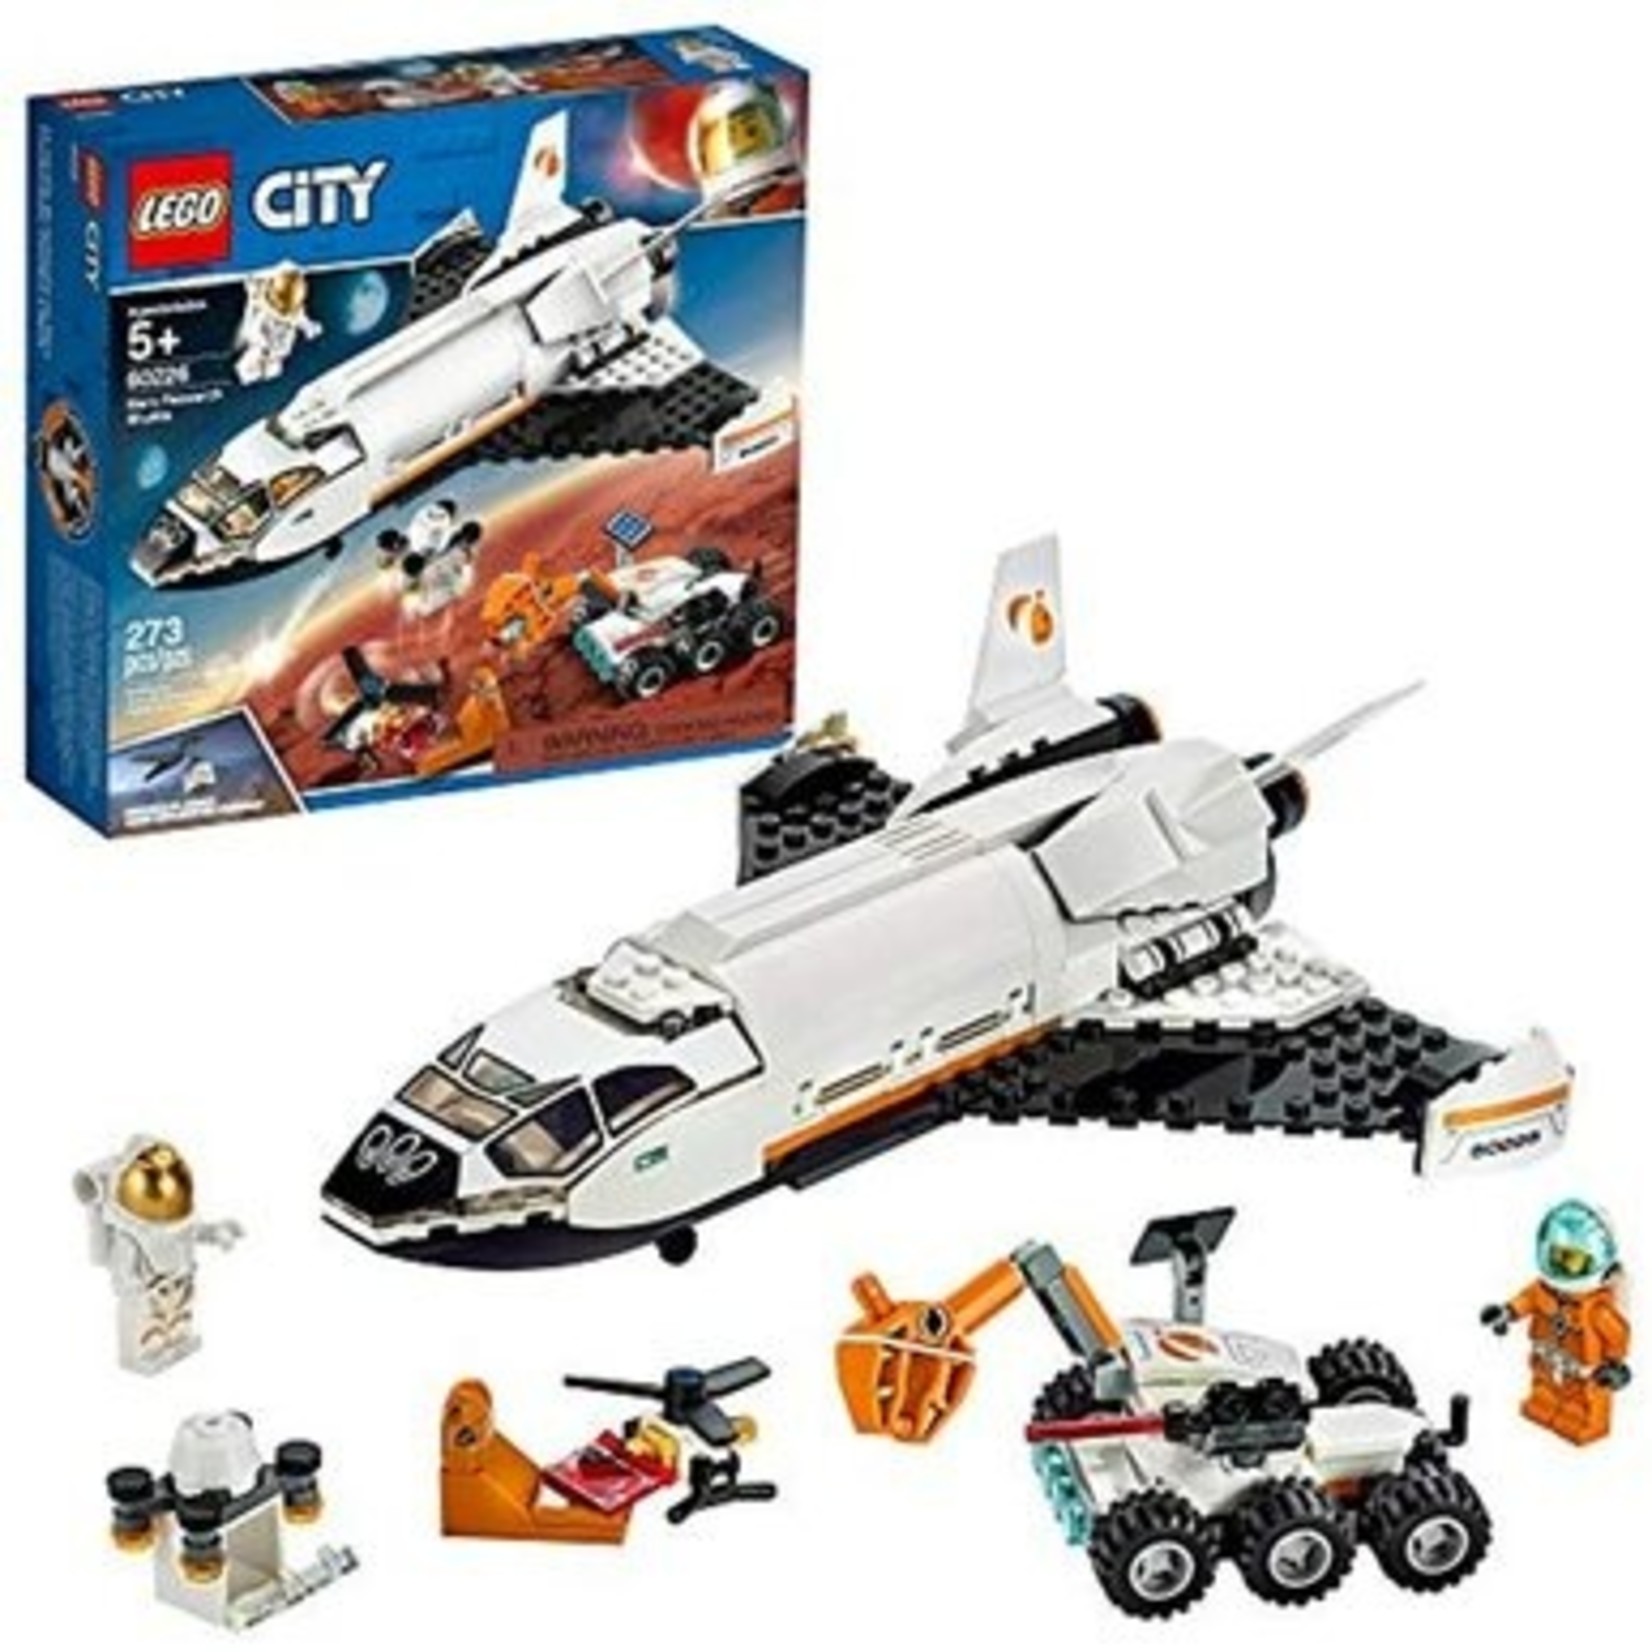 LEGO LEGO City Space Mars Research Shuttle 60226